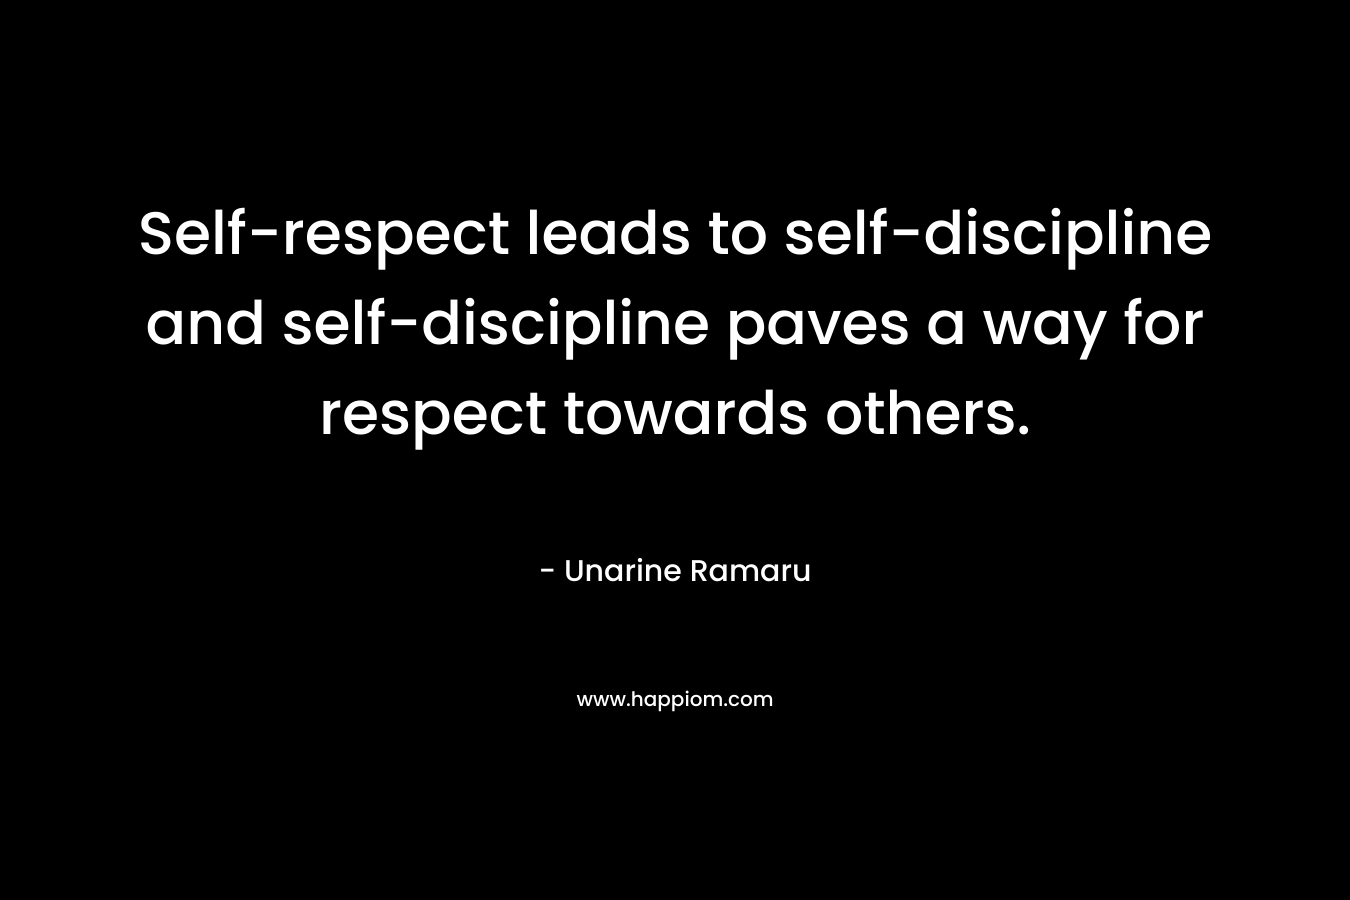 Self-respect leads to self-discipline and self-discipline paves a way for respect towards others.